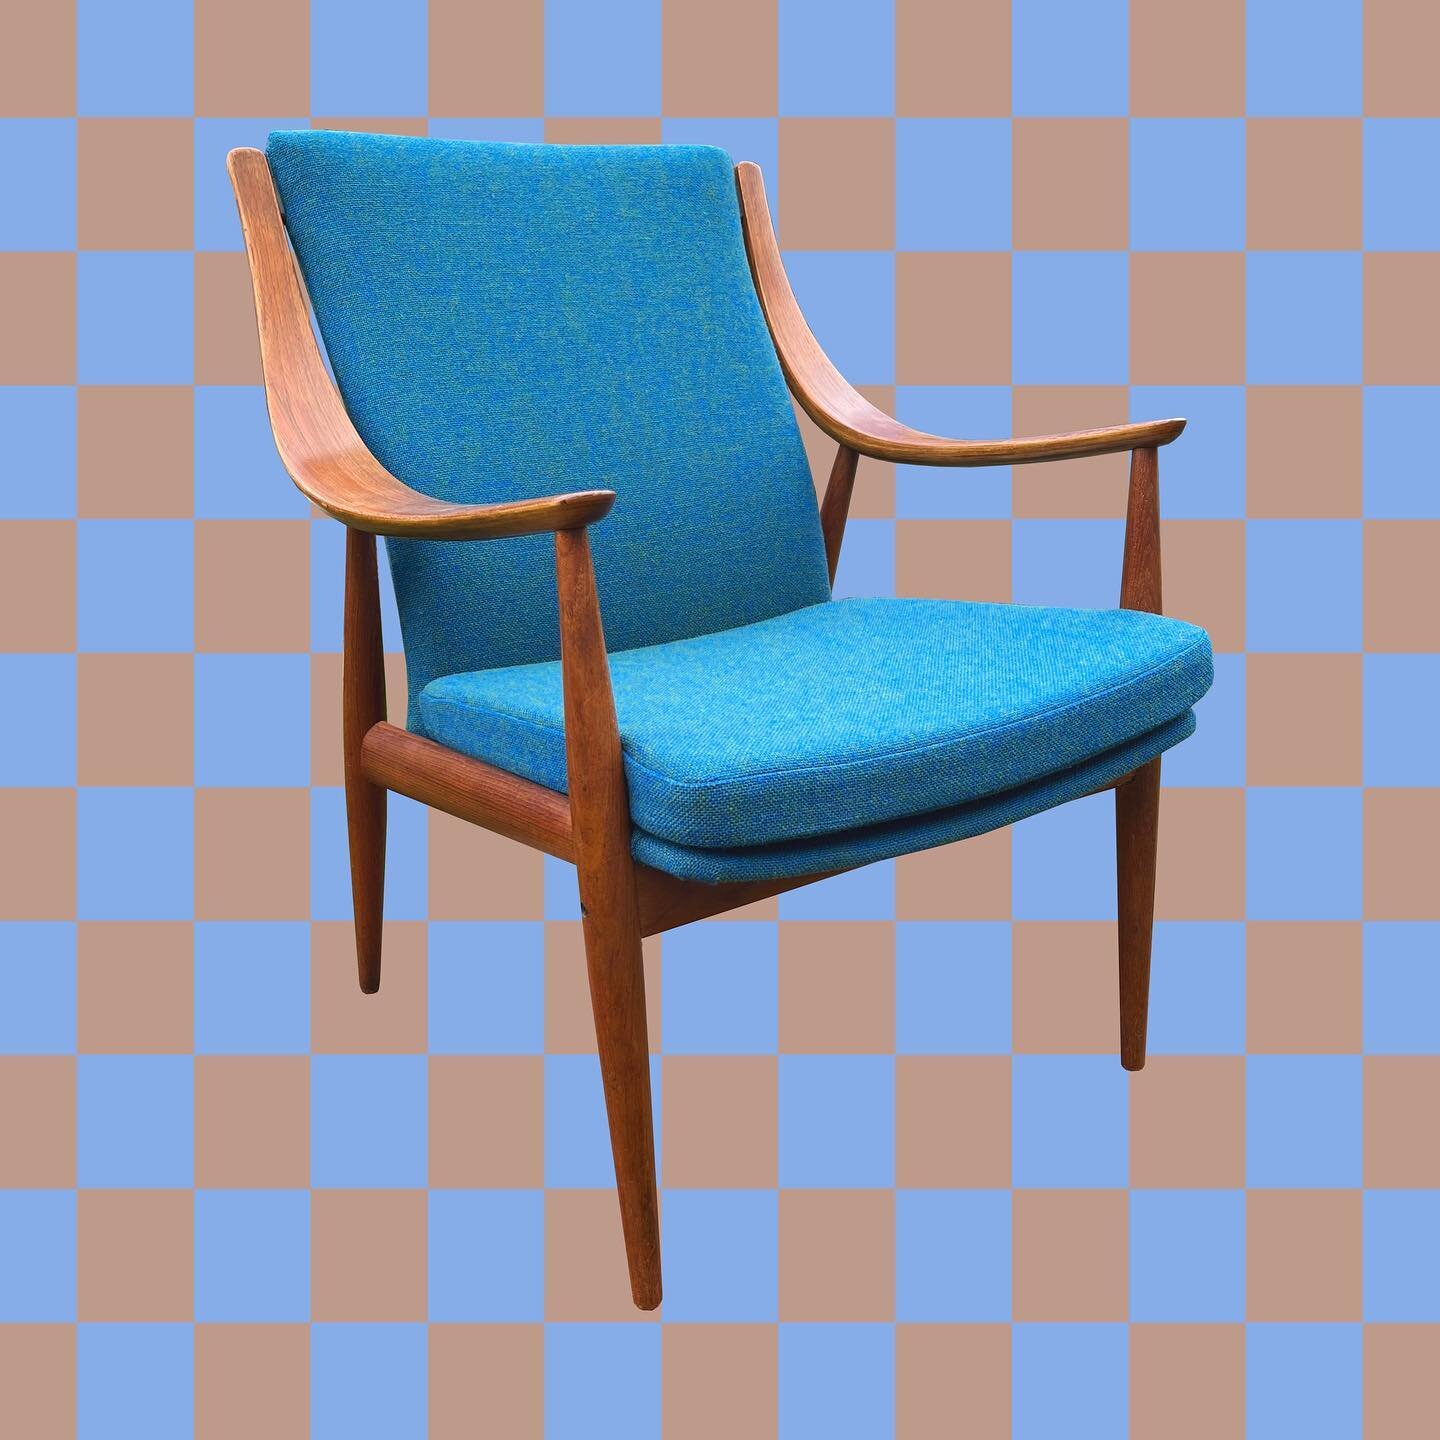 Just wrapped up this mega babe, mid-century lounge chair designed by Peter Hvidt in Denmark. A pleasurable little chair and very comfy. Done in an iconic turquoise Hallingdal 65 wool designed by Nanna Ditzel for Kvadrat, this beaut came in bits and p